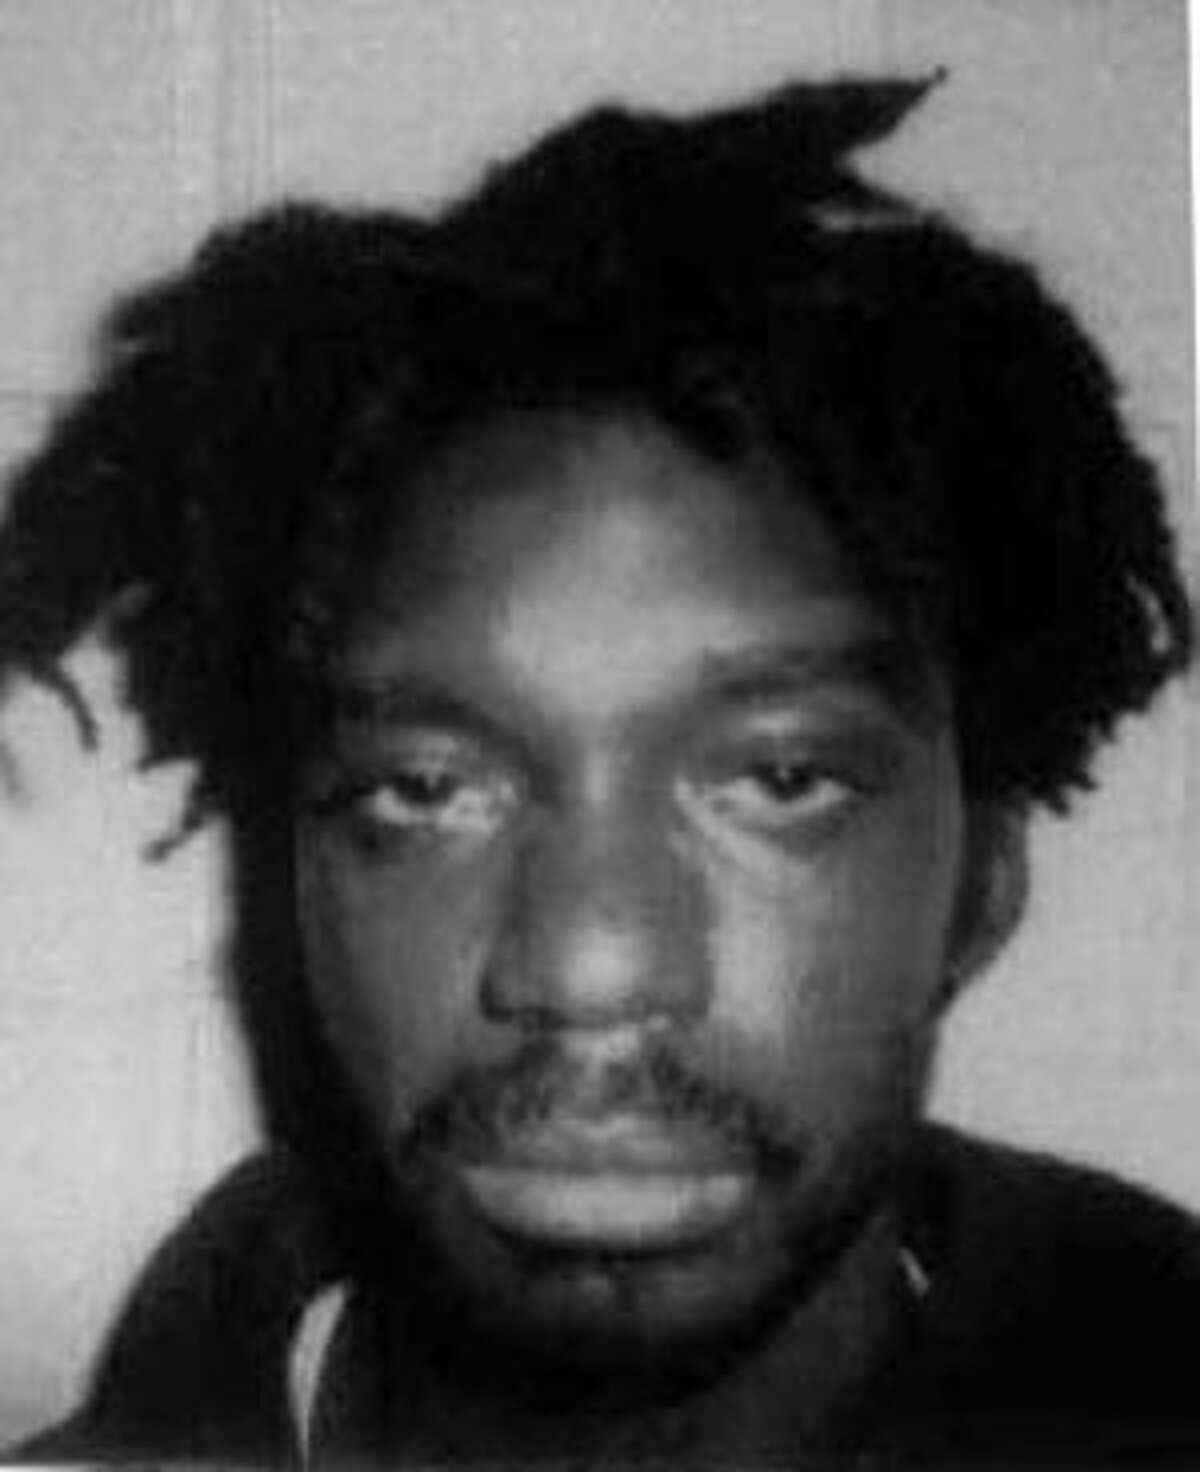 Richard Reynolds, age 39, Brooklyn, N.Y., crack dealer was convicted in the Dec. 18, 1992, murder of Waterbury police Officer Walter T. Williams. A state court has ruled that Reynolds and other former death-row inmates can sue the state for cruel and unusual punishment after he was taken off death row and sentenced to life imprisonment without parole.